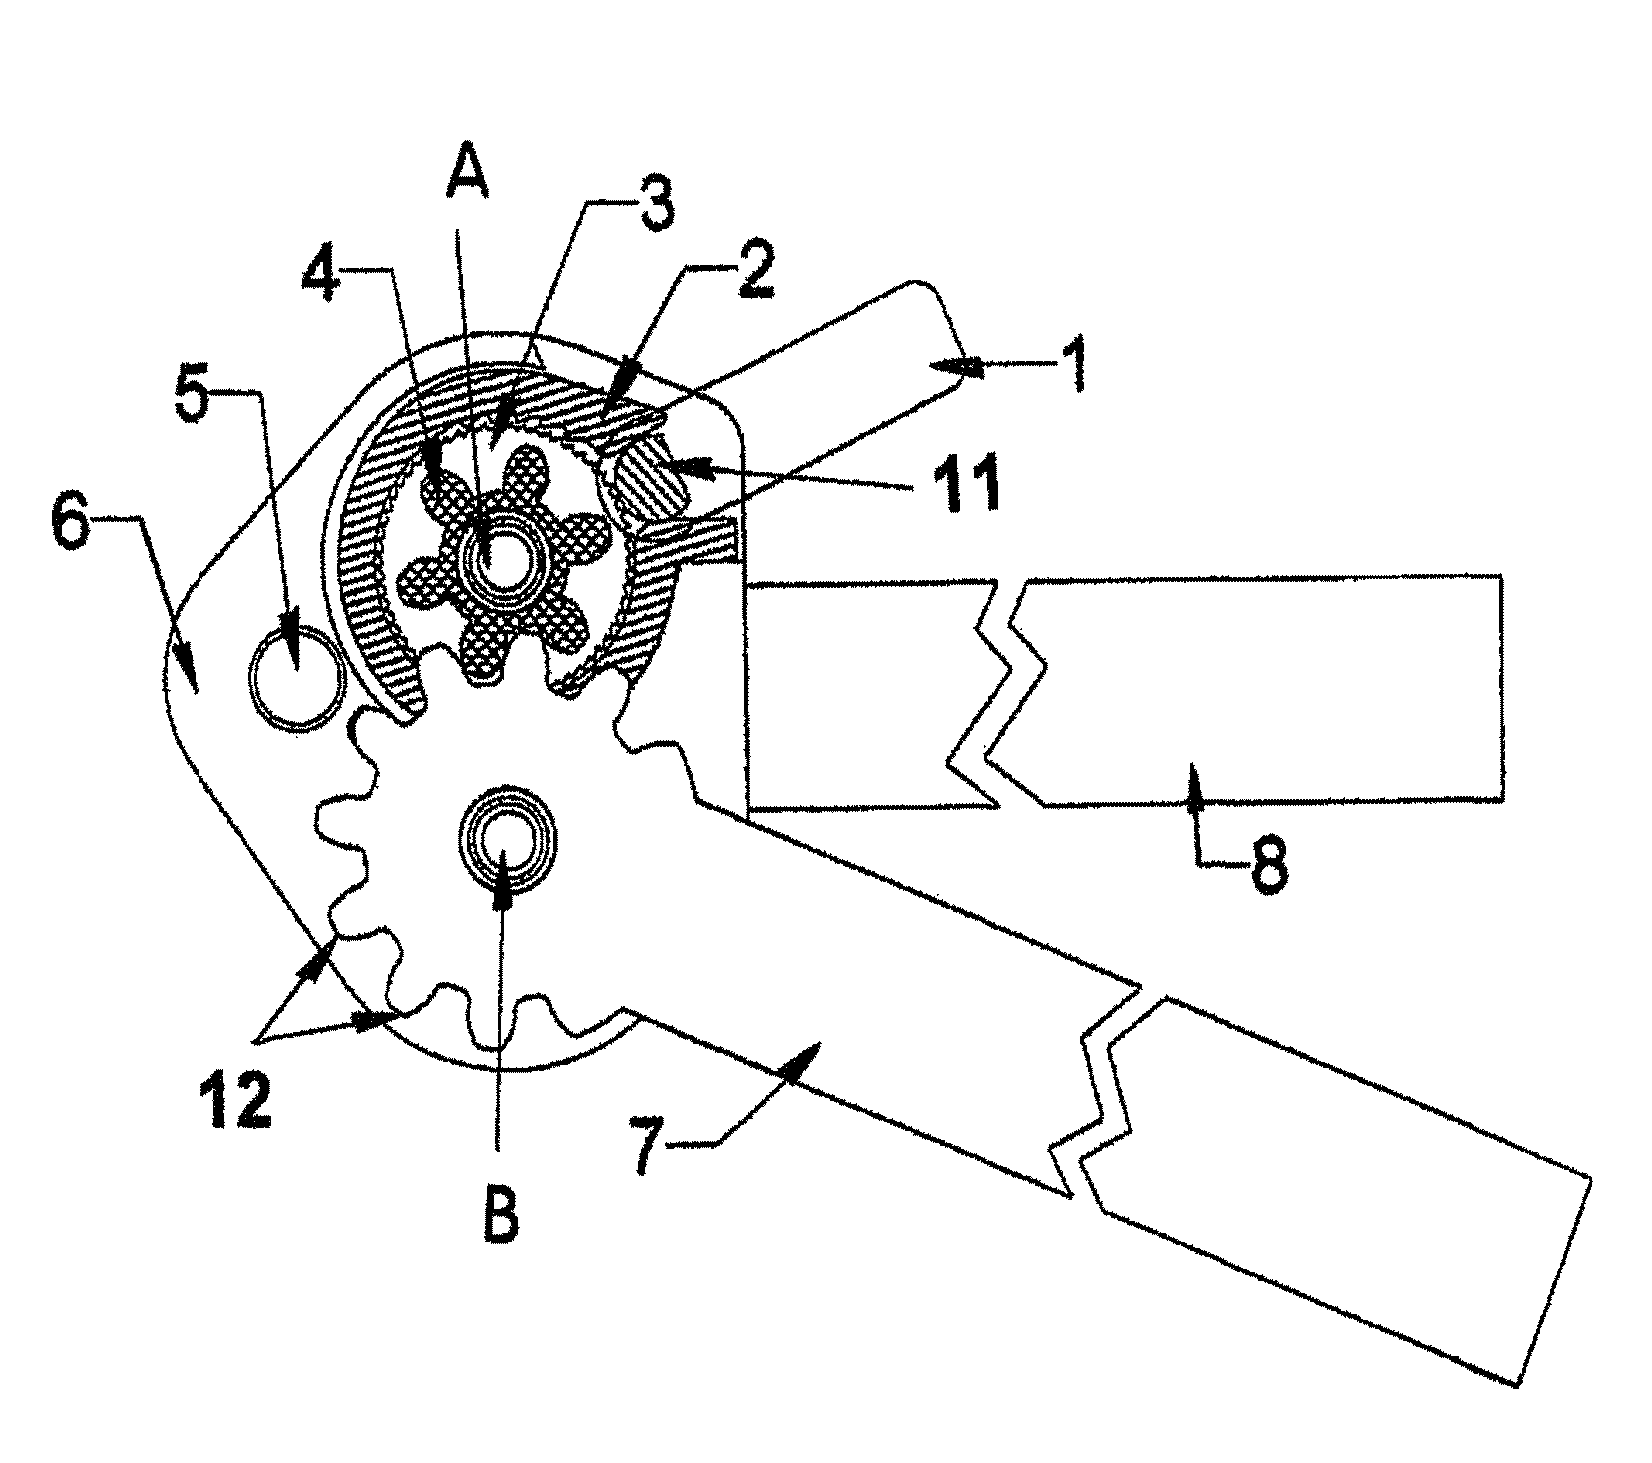 Snap lock assisted mechanical joint